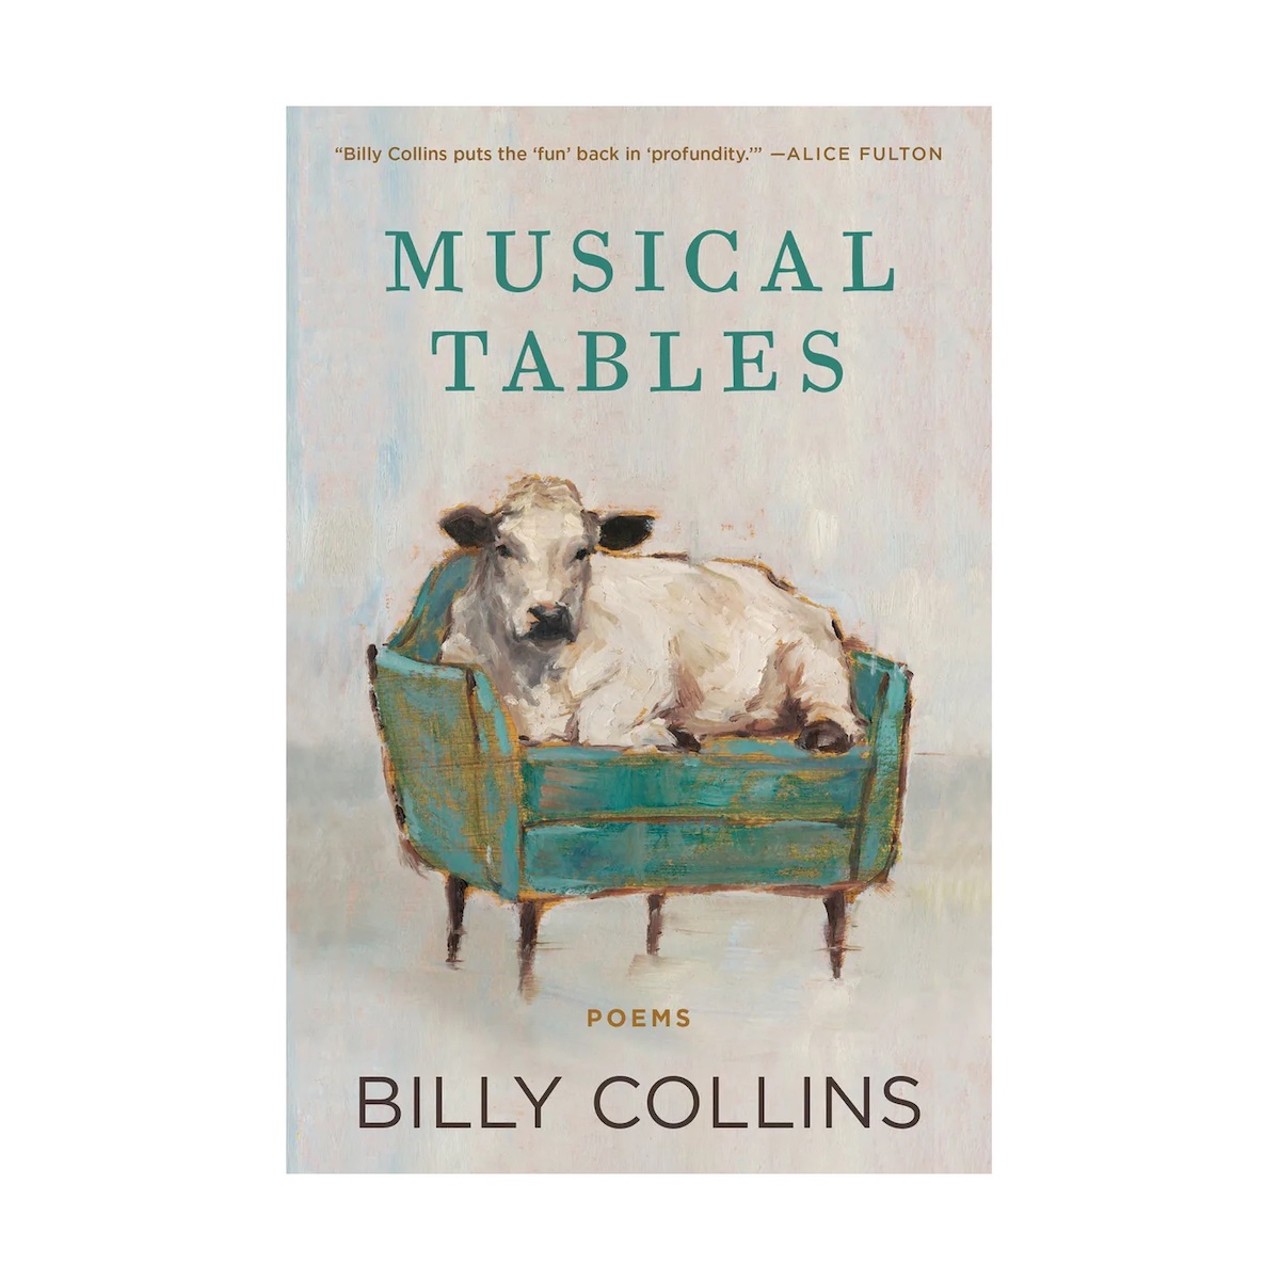 PoetryMusical Tables by Billy Collins
In November, the writer and Winter Park resident released his new book, “Musical Tables,” via Penguin Random House. The work is one of his longest books—I counted 129 poems—and in a lot of ways, also one of his shortest. There are poems that are like a single line or couplet, and it’s a wonder how Collins, 81, ended up going in this direction.
FFO: Chords, the Tao Te Ching if it was funnier (Penguin Random House, $26)